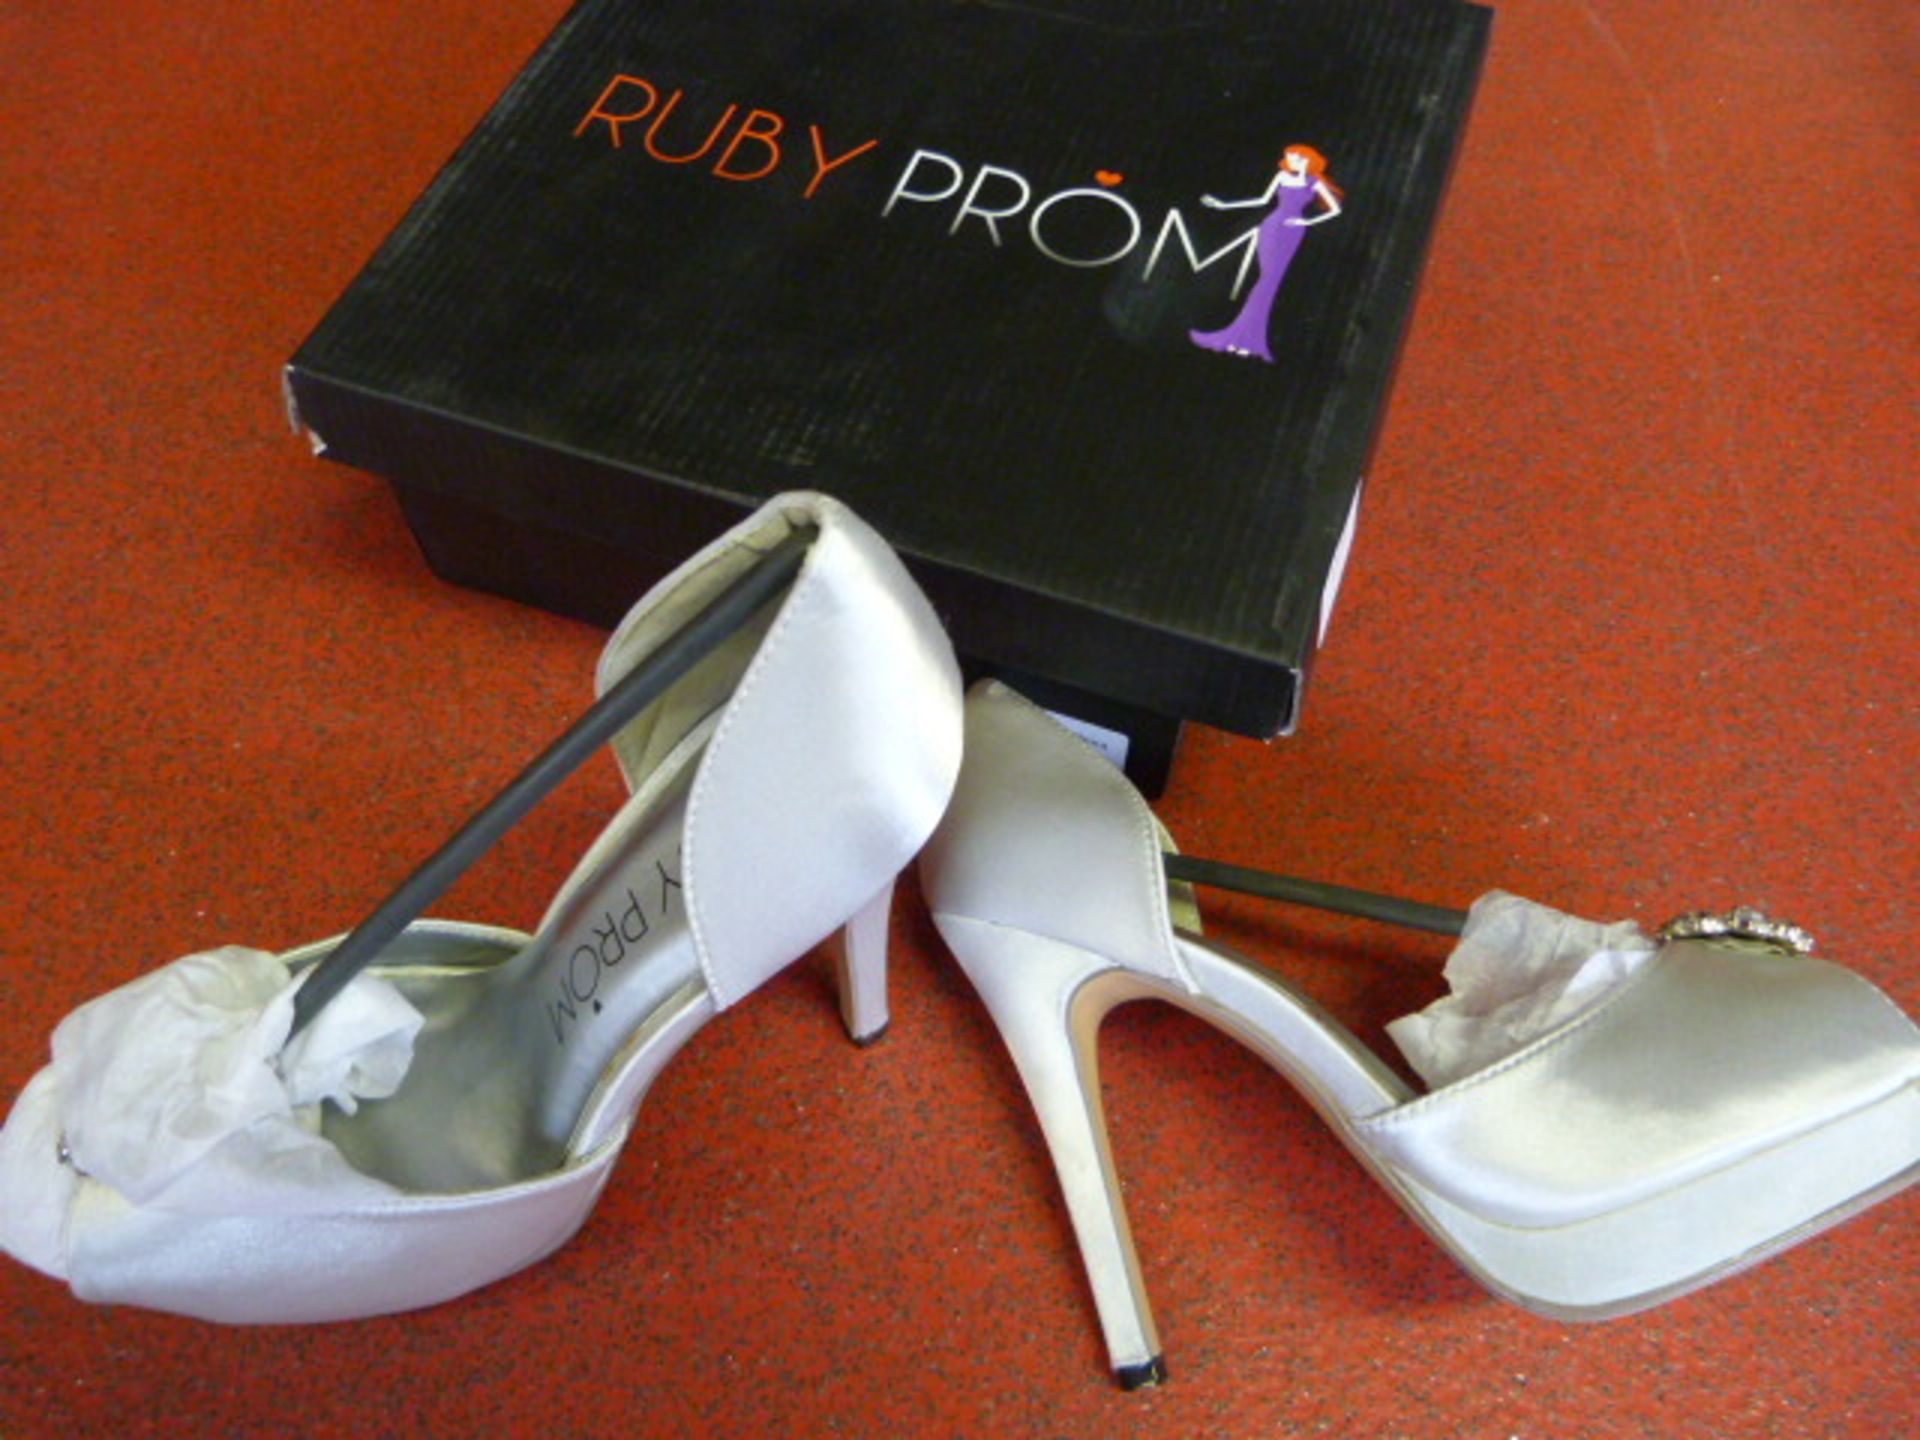 *Six Pairs of Ruby Prom RU02 Silver Prom Shoes (Mi